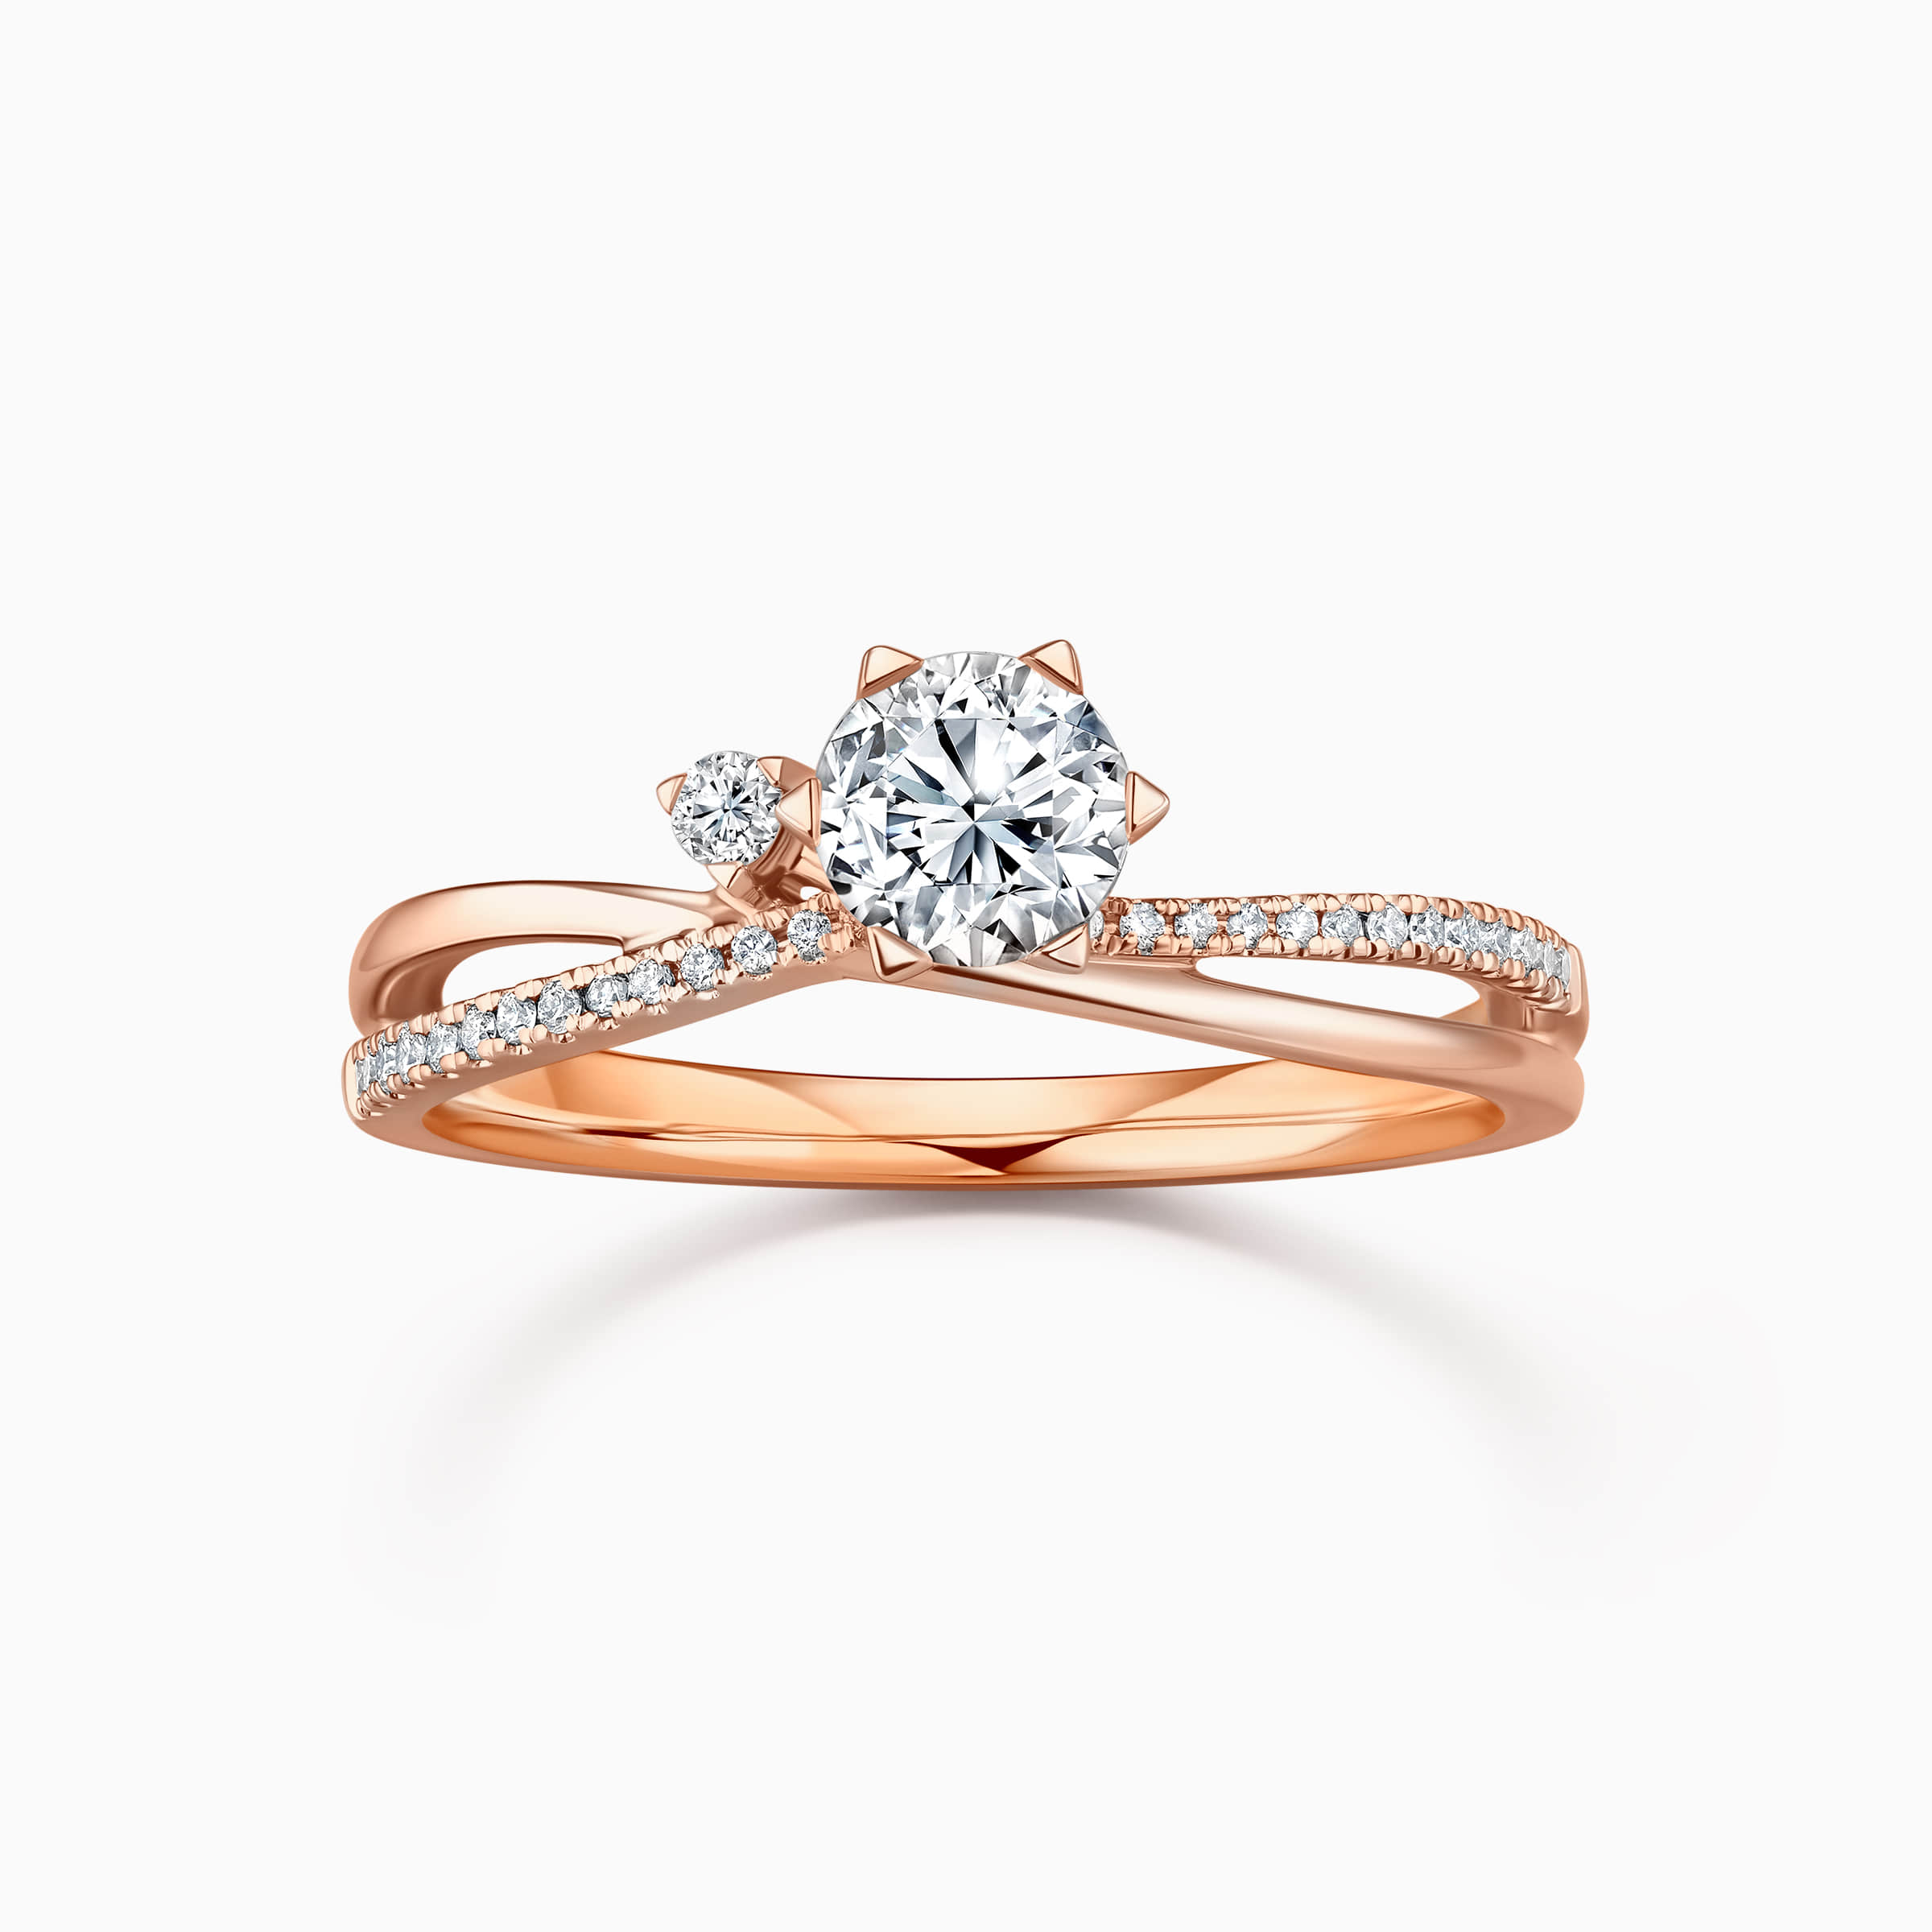 Darry Ring 2 stone promise ring rose gold